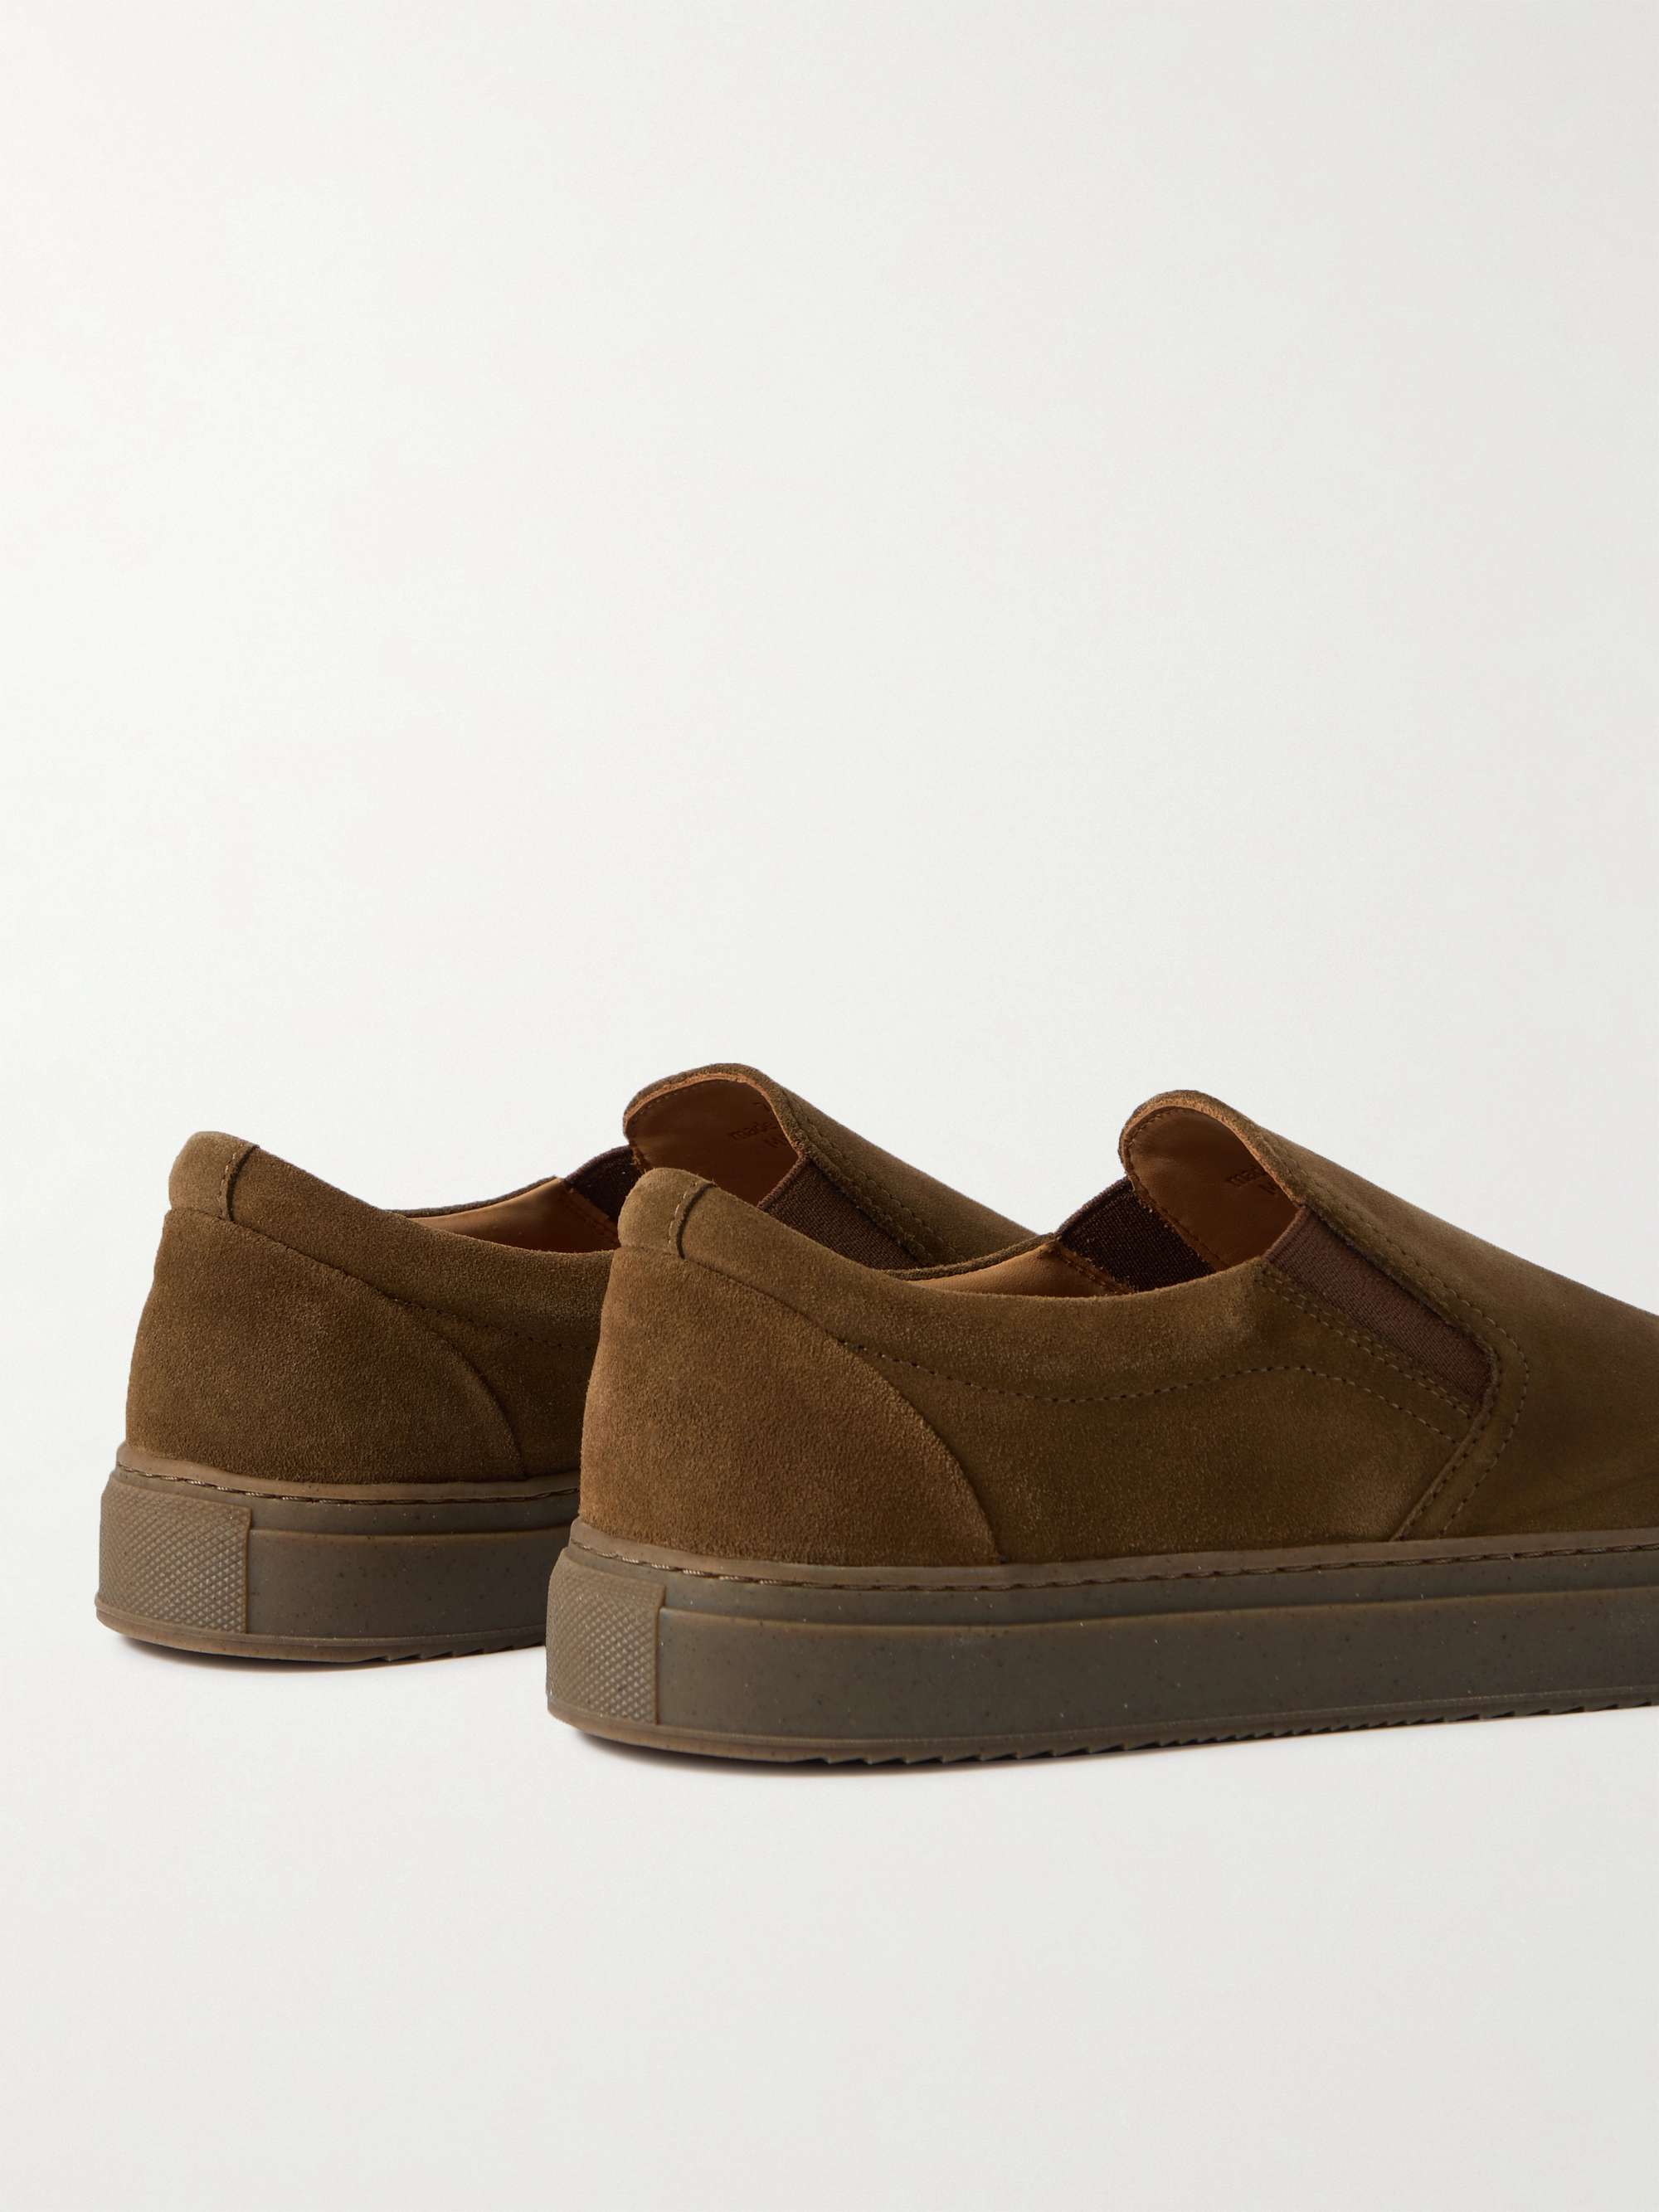 MR P. Regenerated Suede by evolo® Slip-On Sneakers